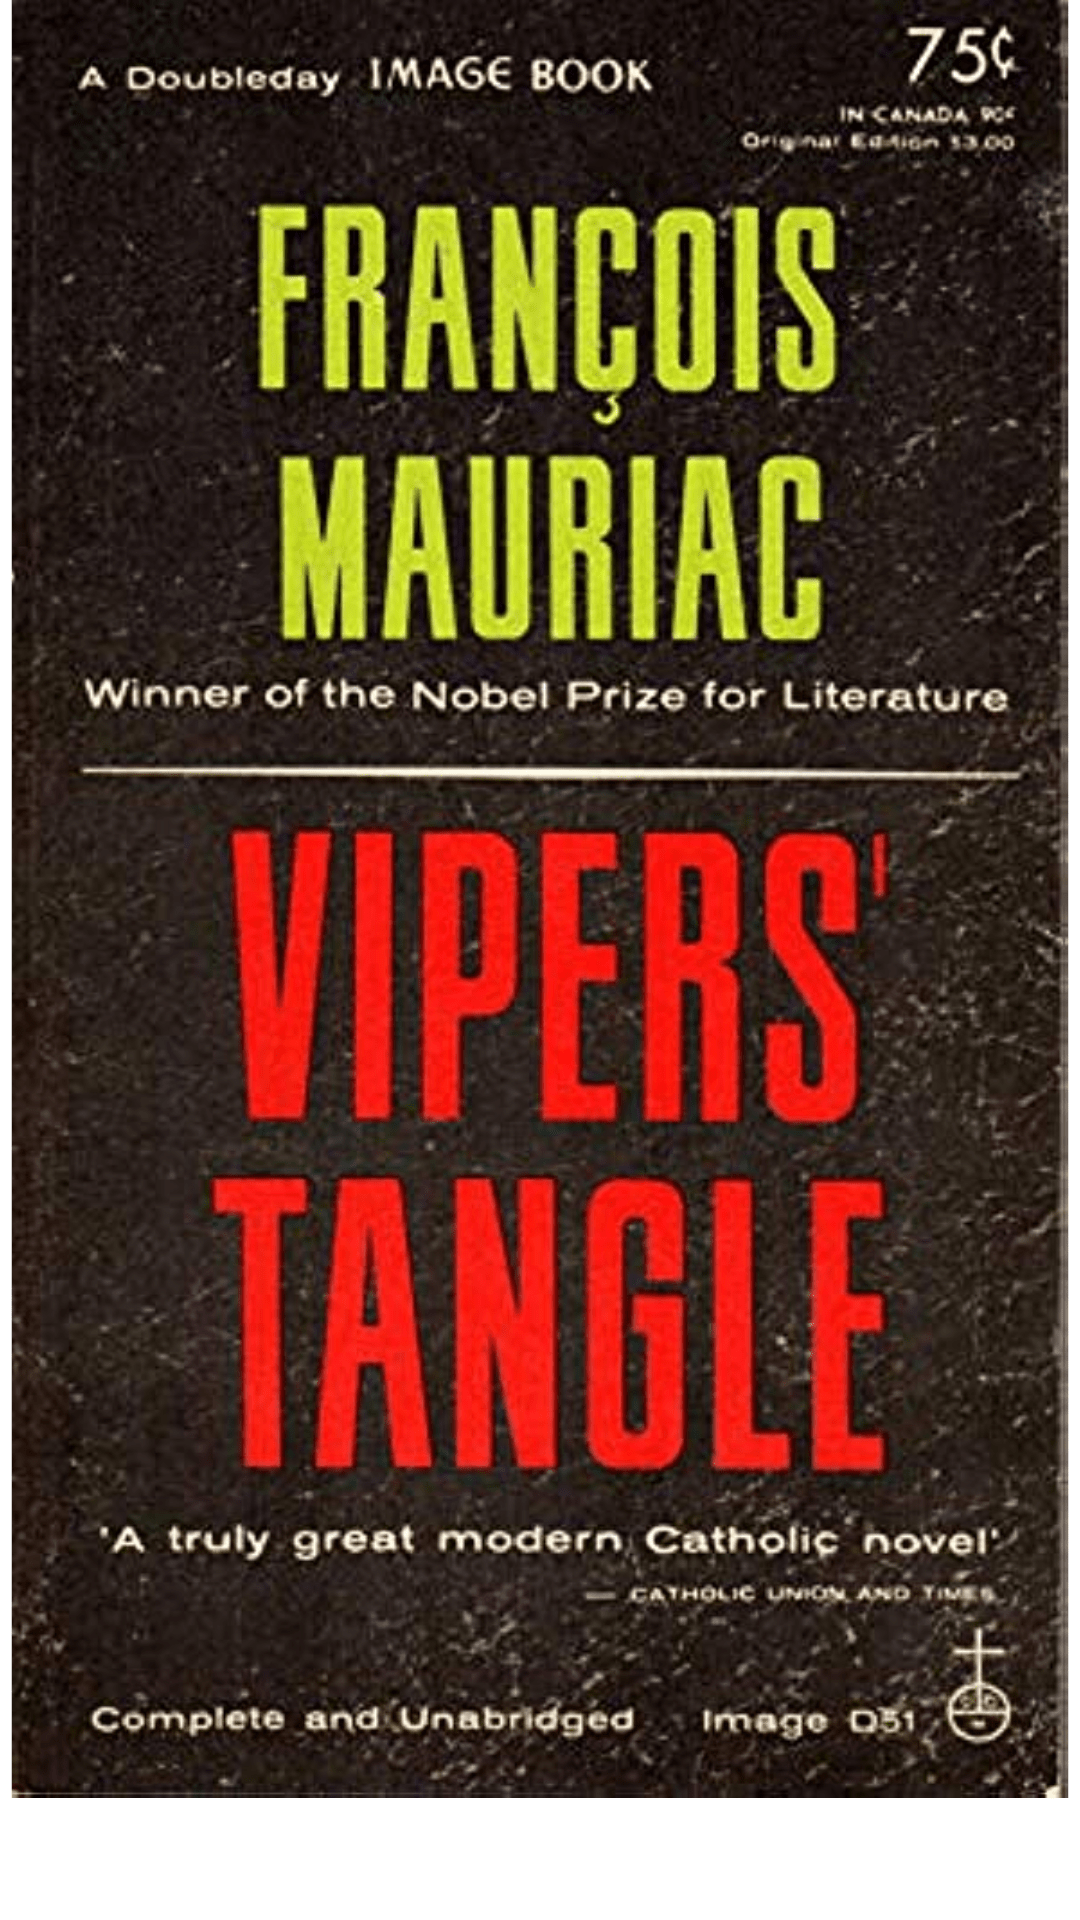 Vipers' Tangle by François Mauriac